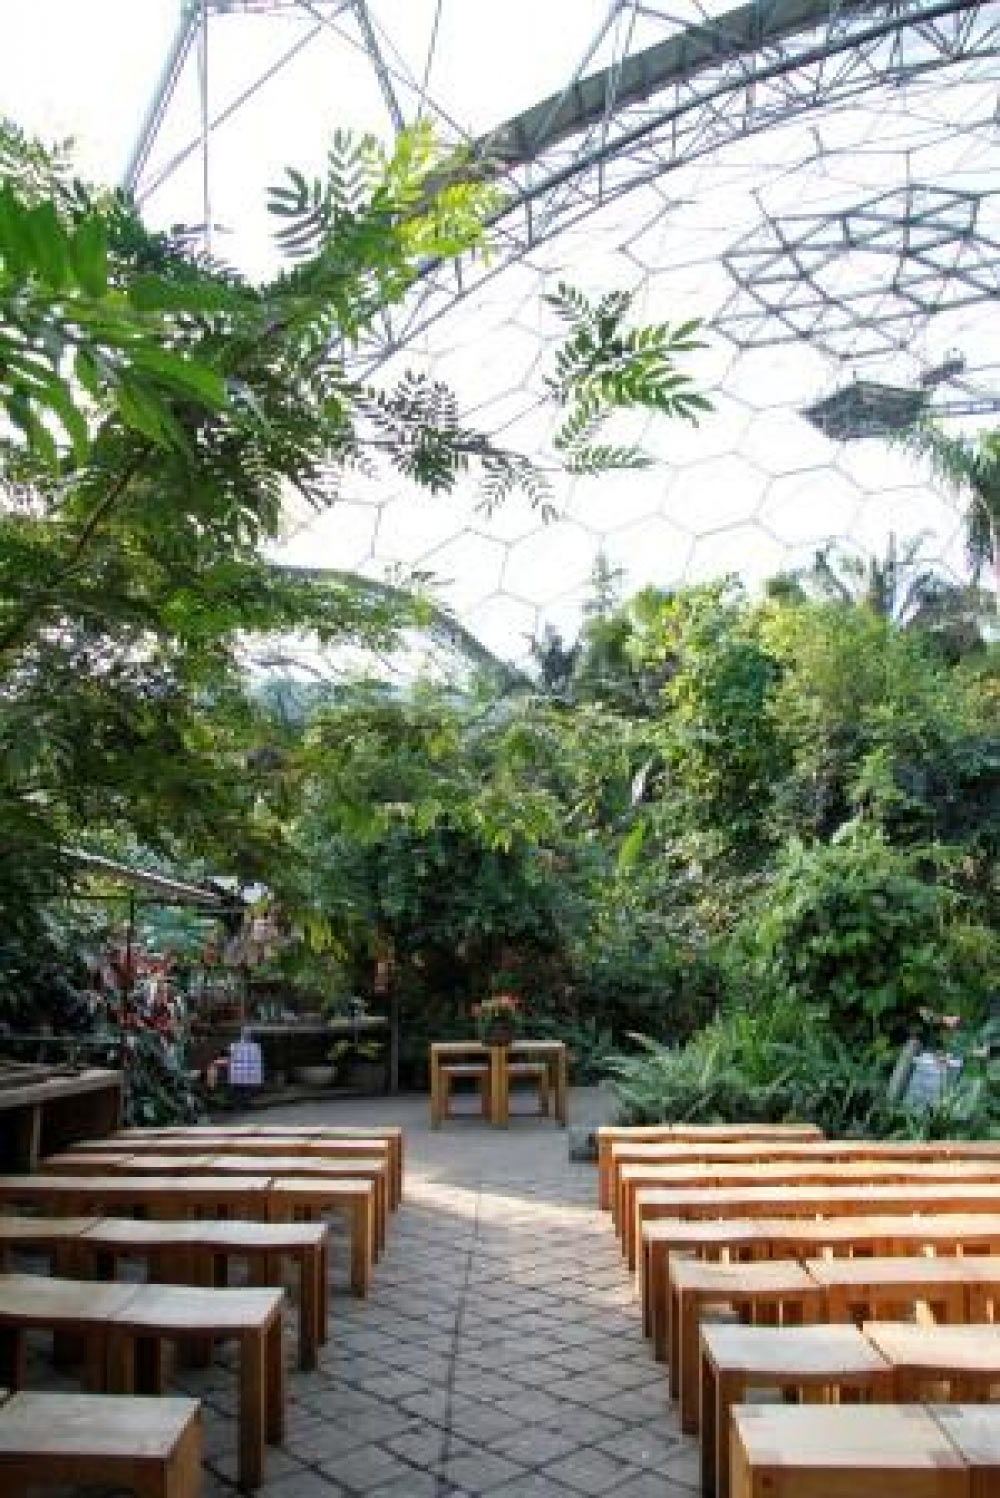 Winter Weddings at The Eden Project